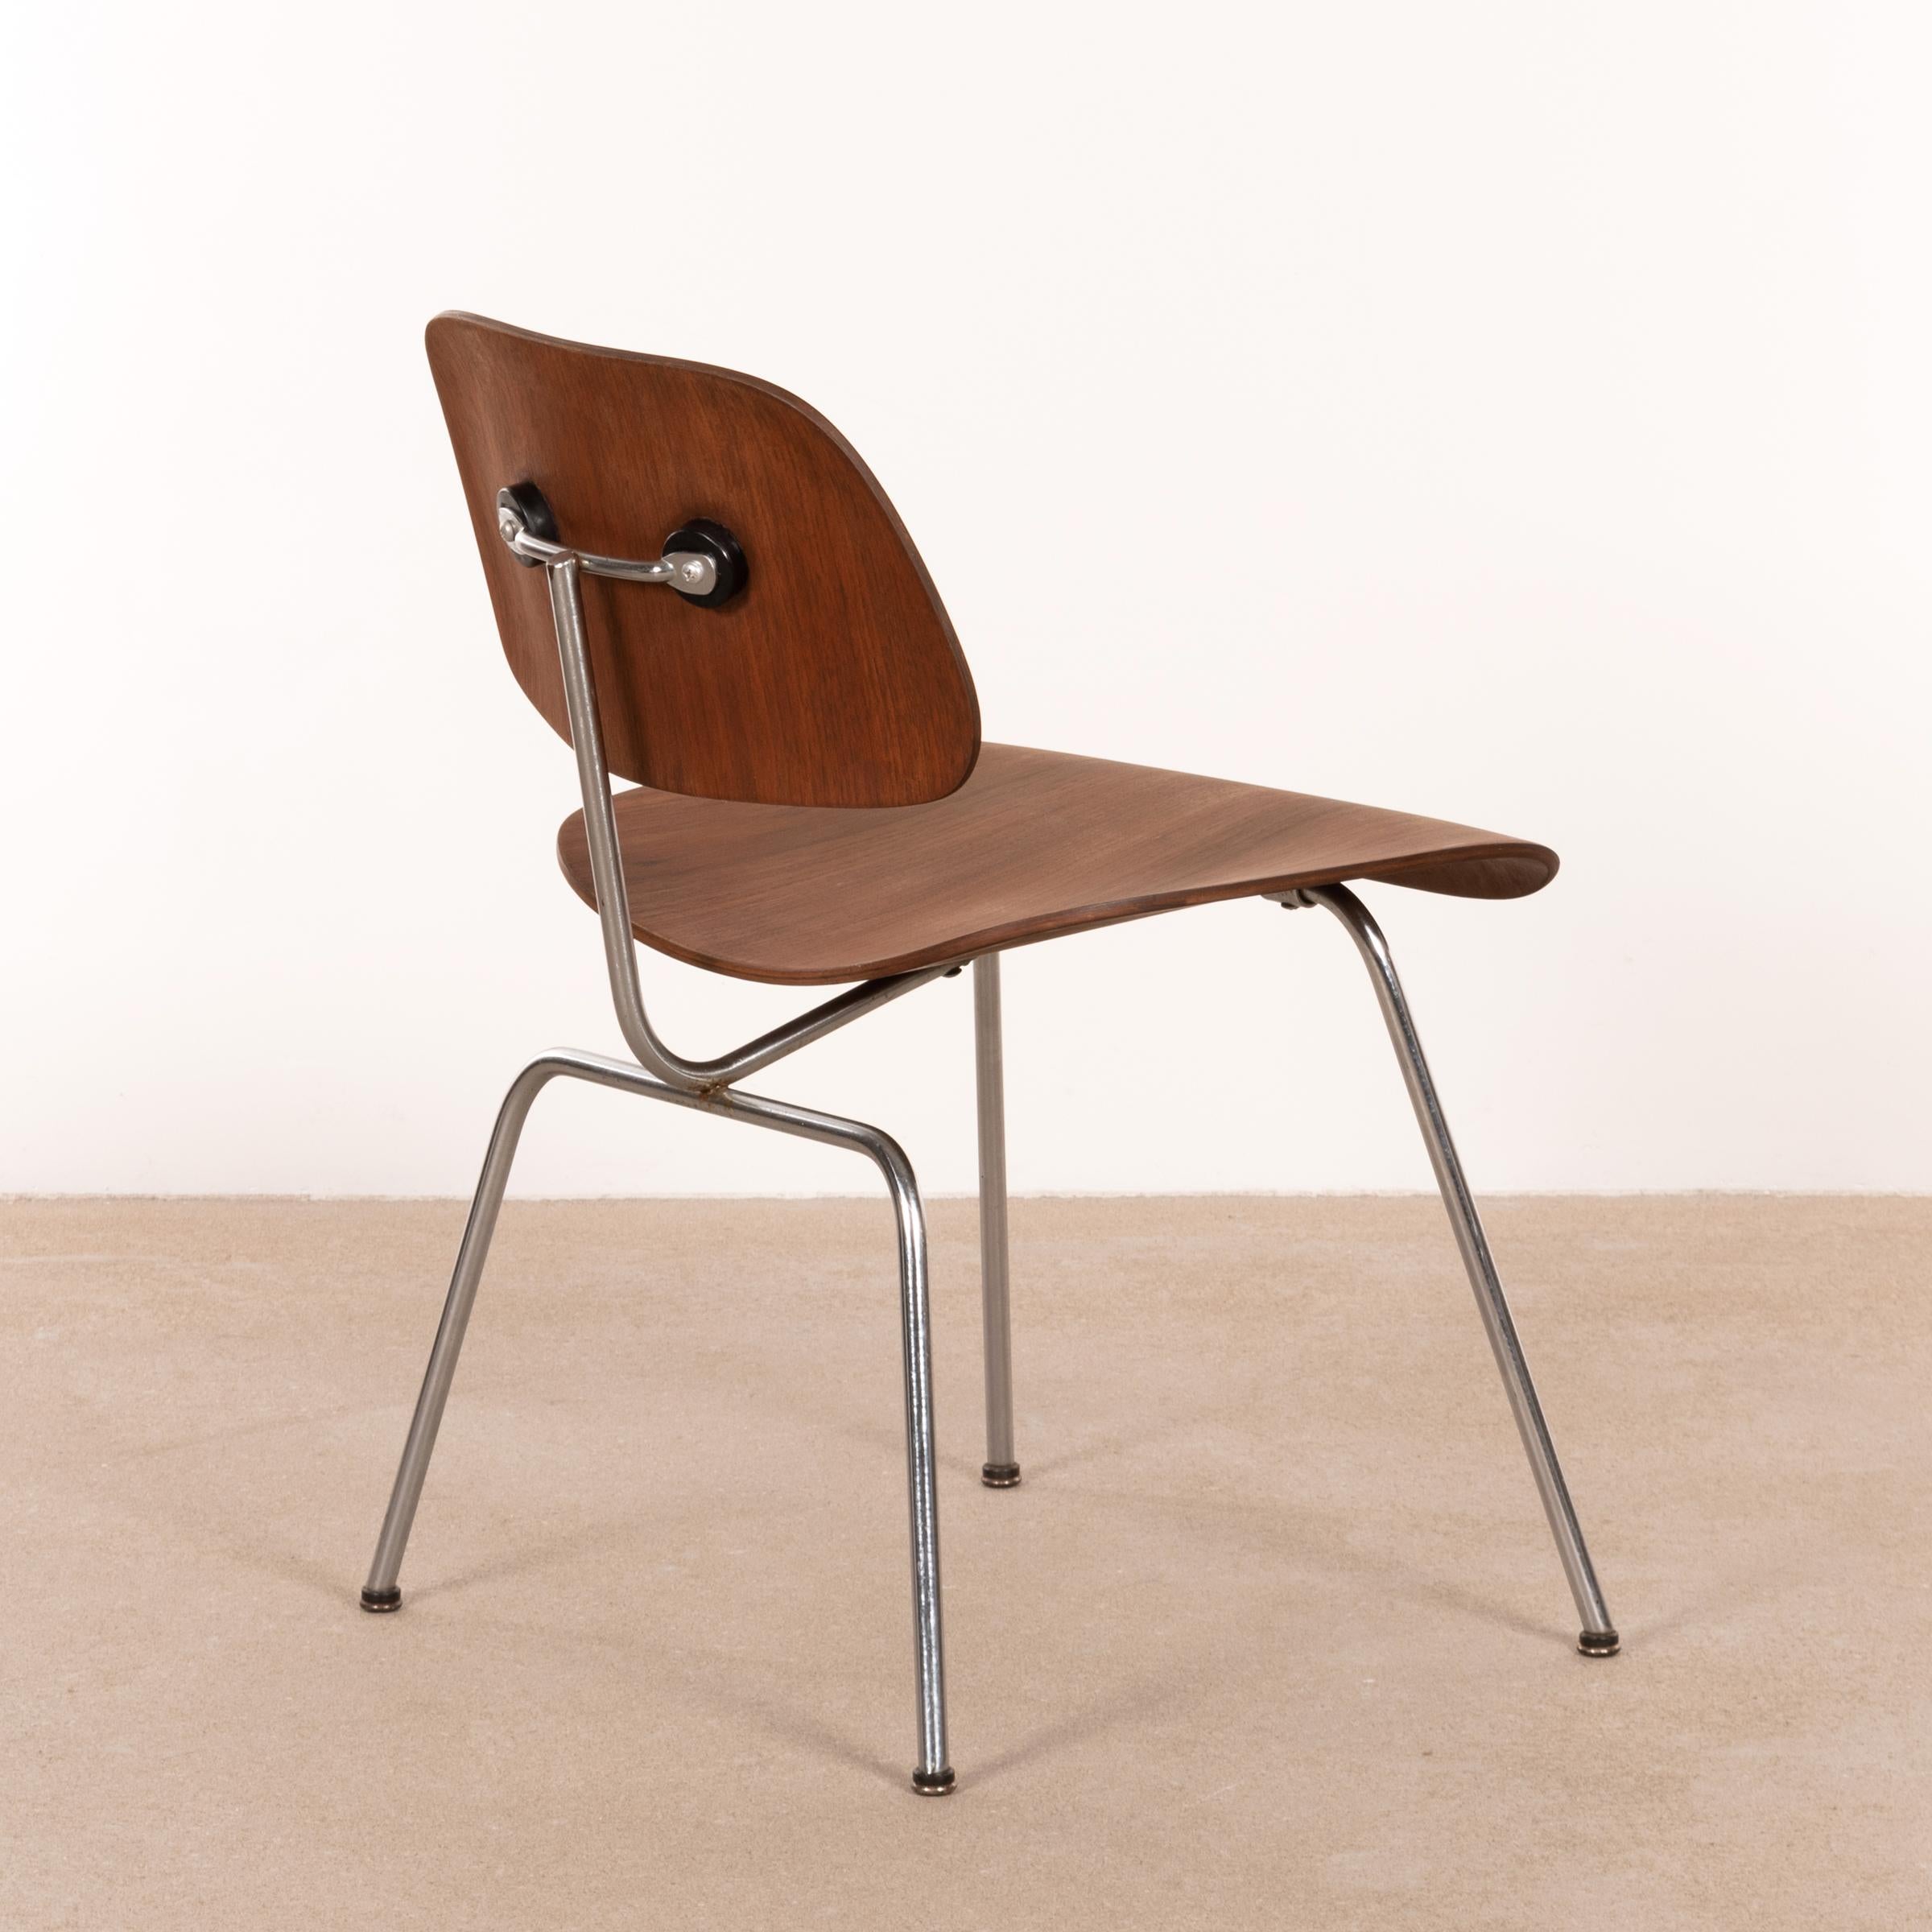 Veneer Charles & Ray Eames Early DCM Walnut Side Chair by Herman Miller, USA